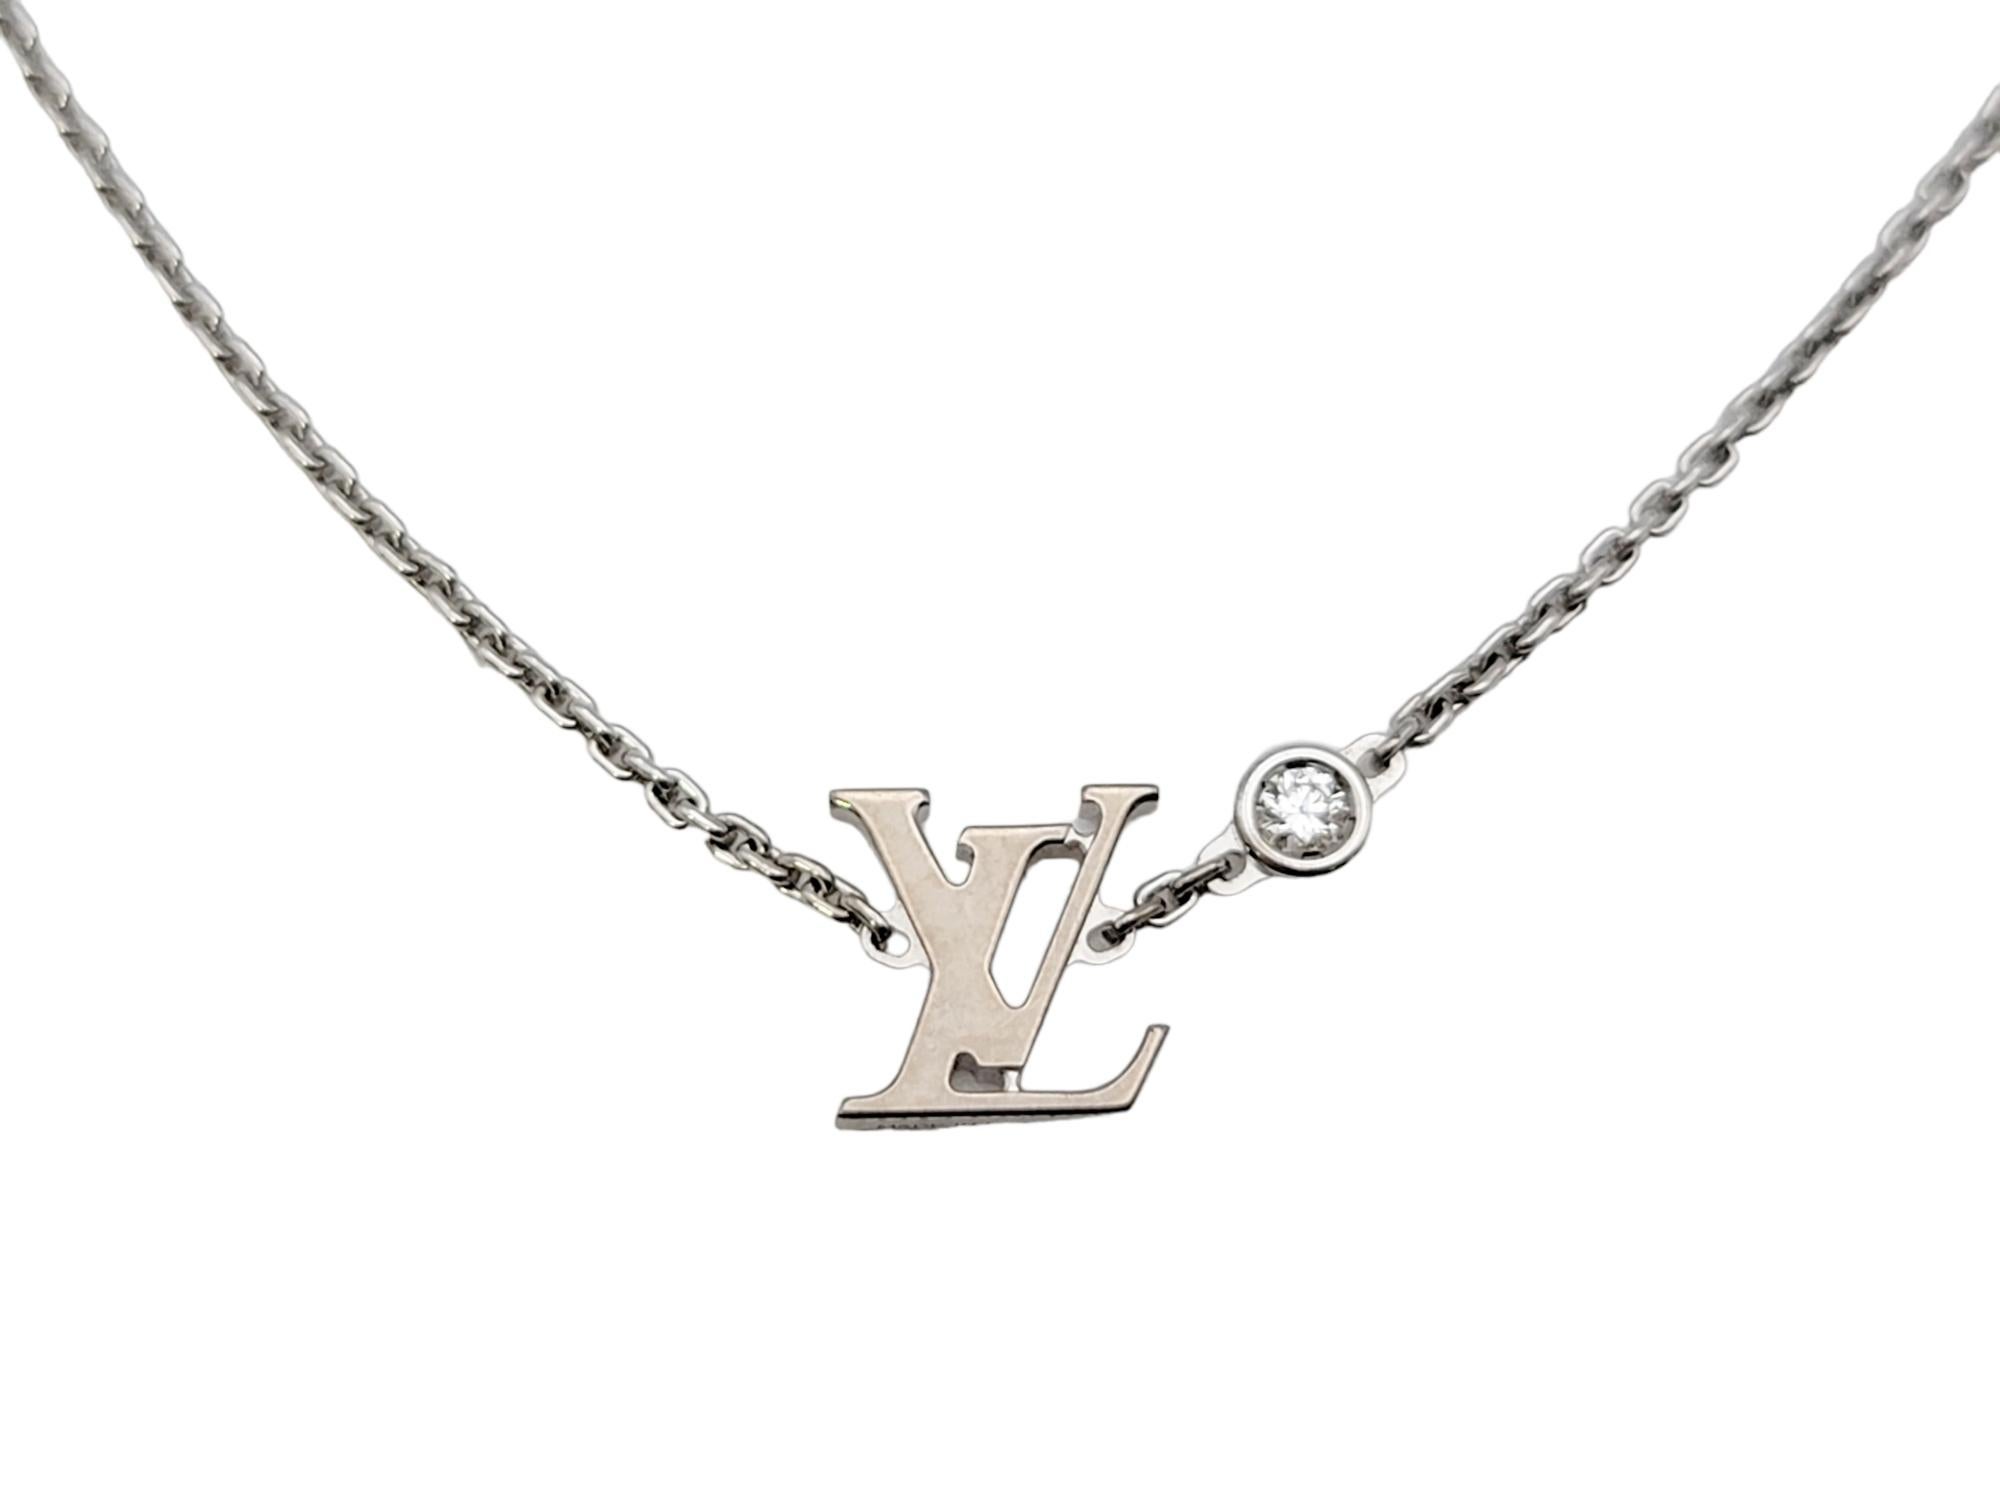 Chic and modern pendant necklace from renowned designer, Louis Vuitton. Features an 18 karat white gold 